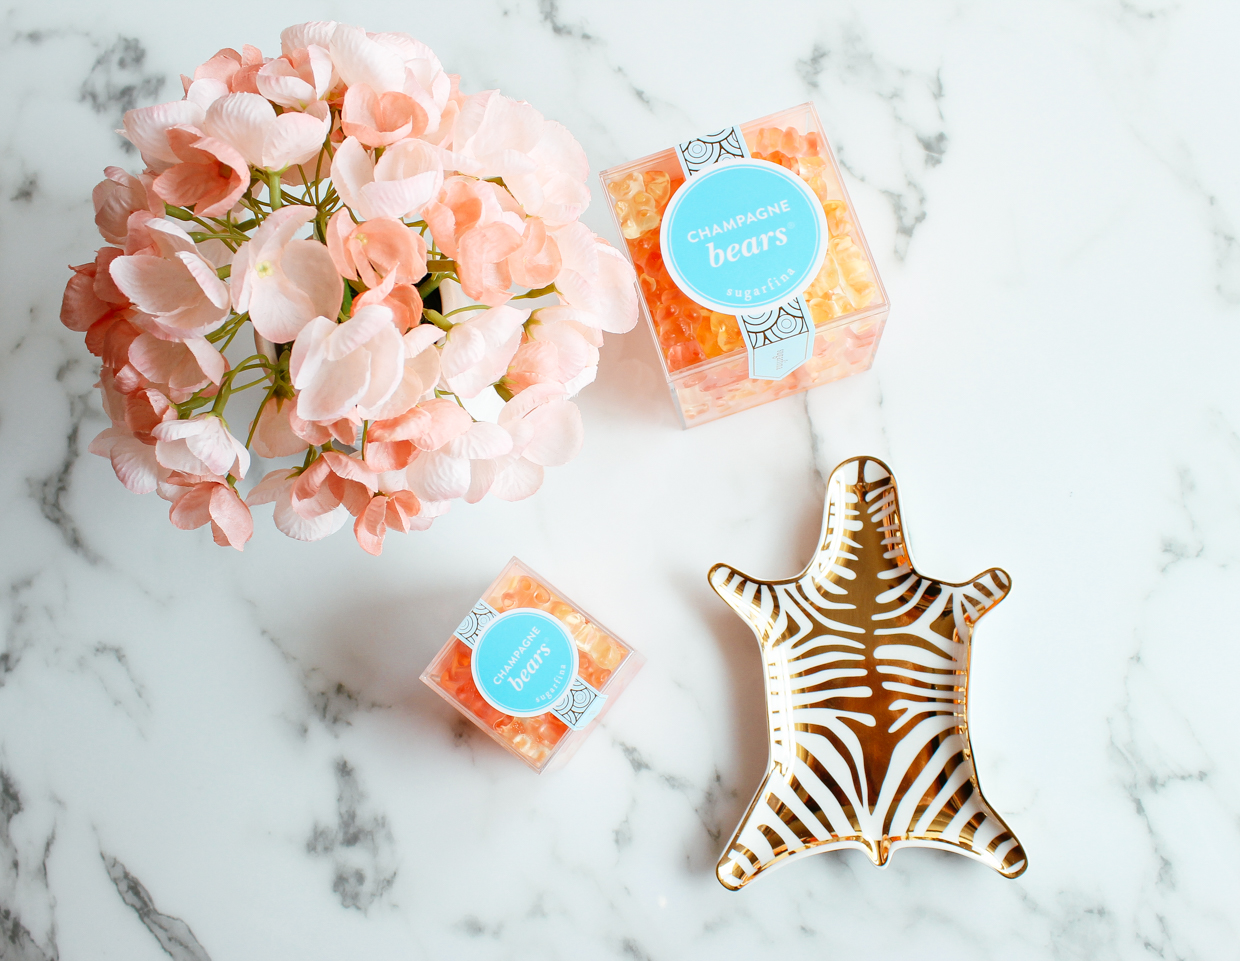 Blondie in the City | Get your mom the gift of @sugarfina Champagne Bears for Mother's Day